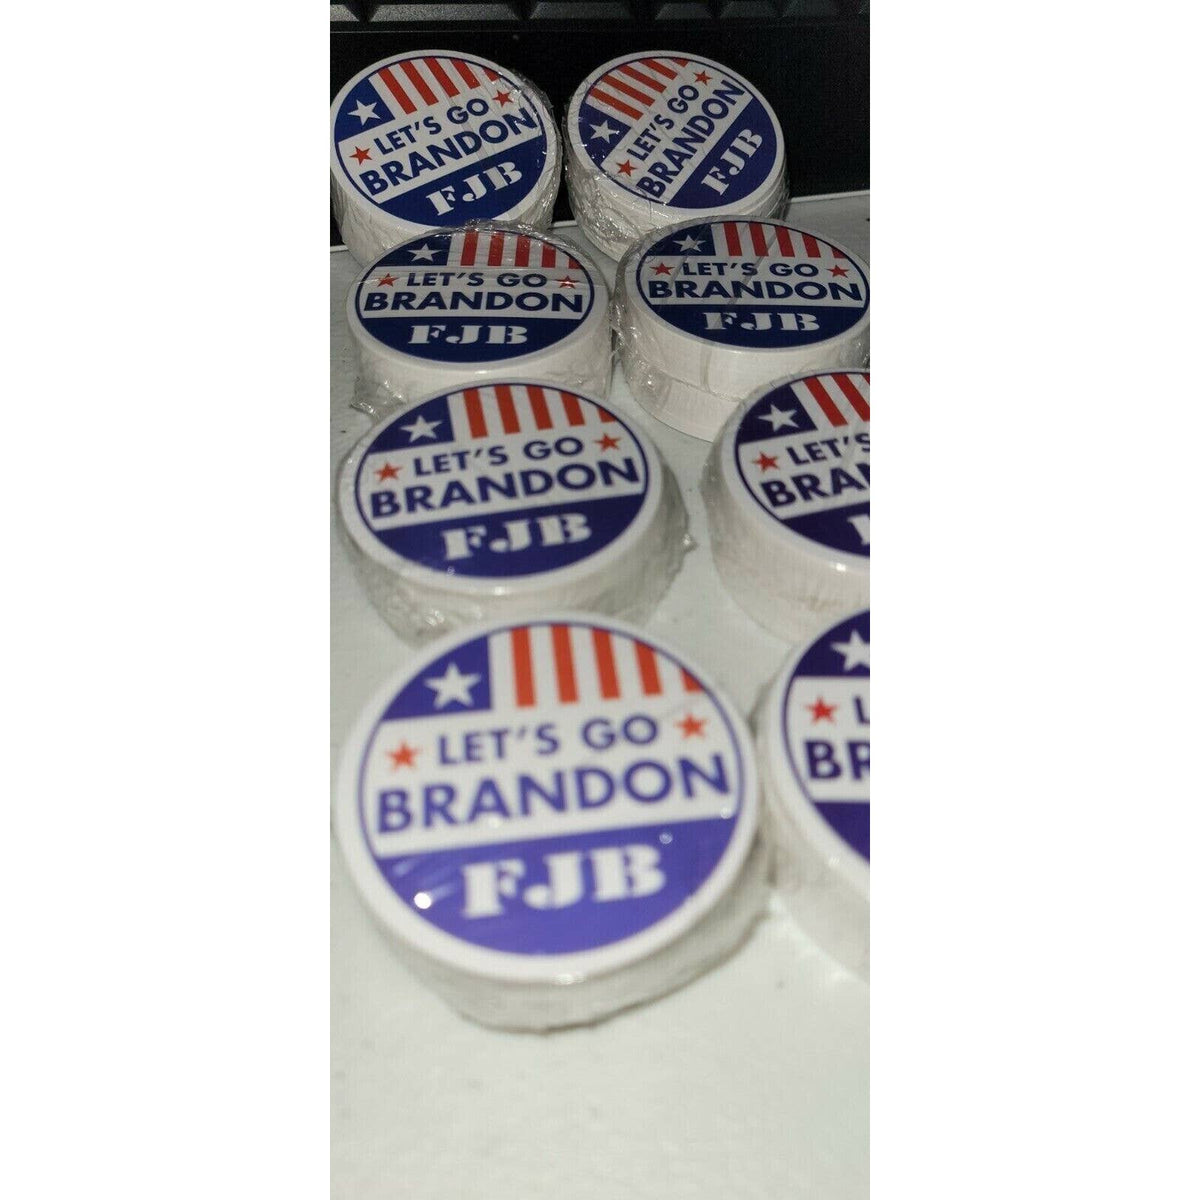 100 Lets Go Brandon FJB Sticker Decal Rolls 2 inch Made in the USA MAGA Stickers